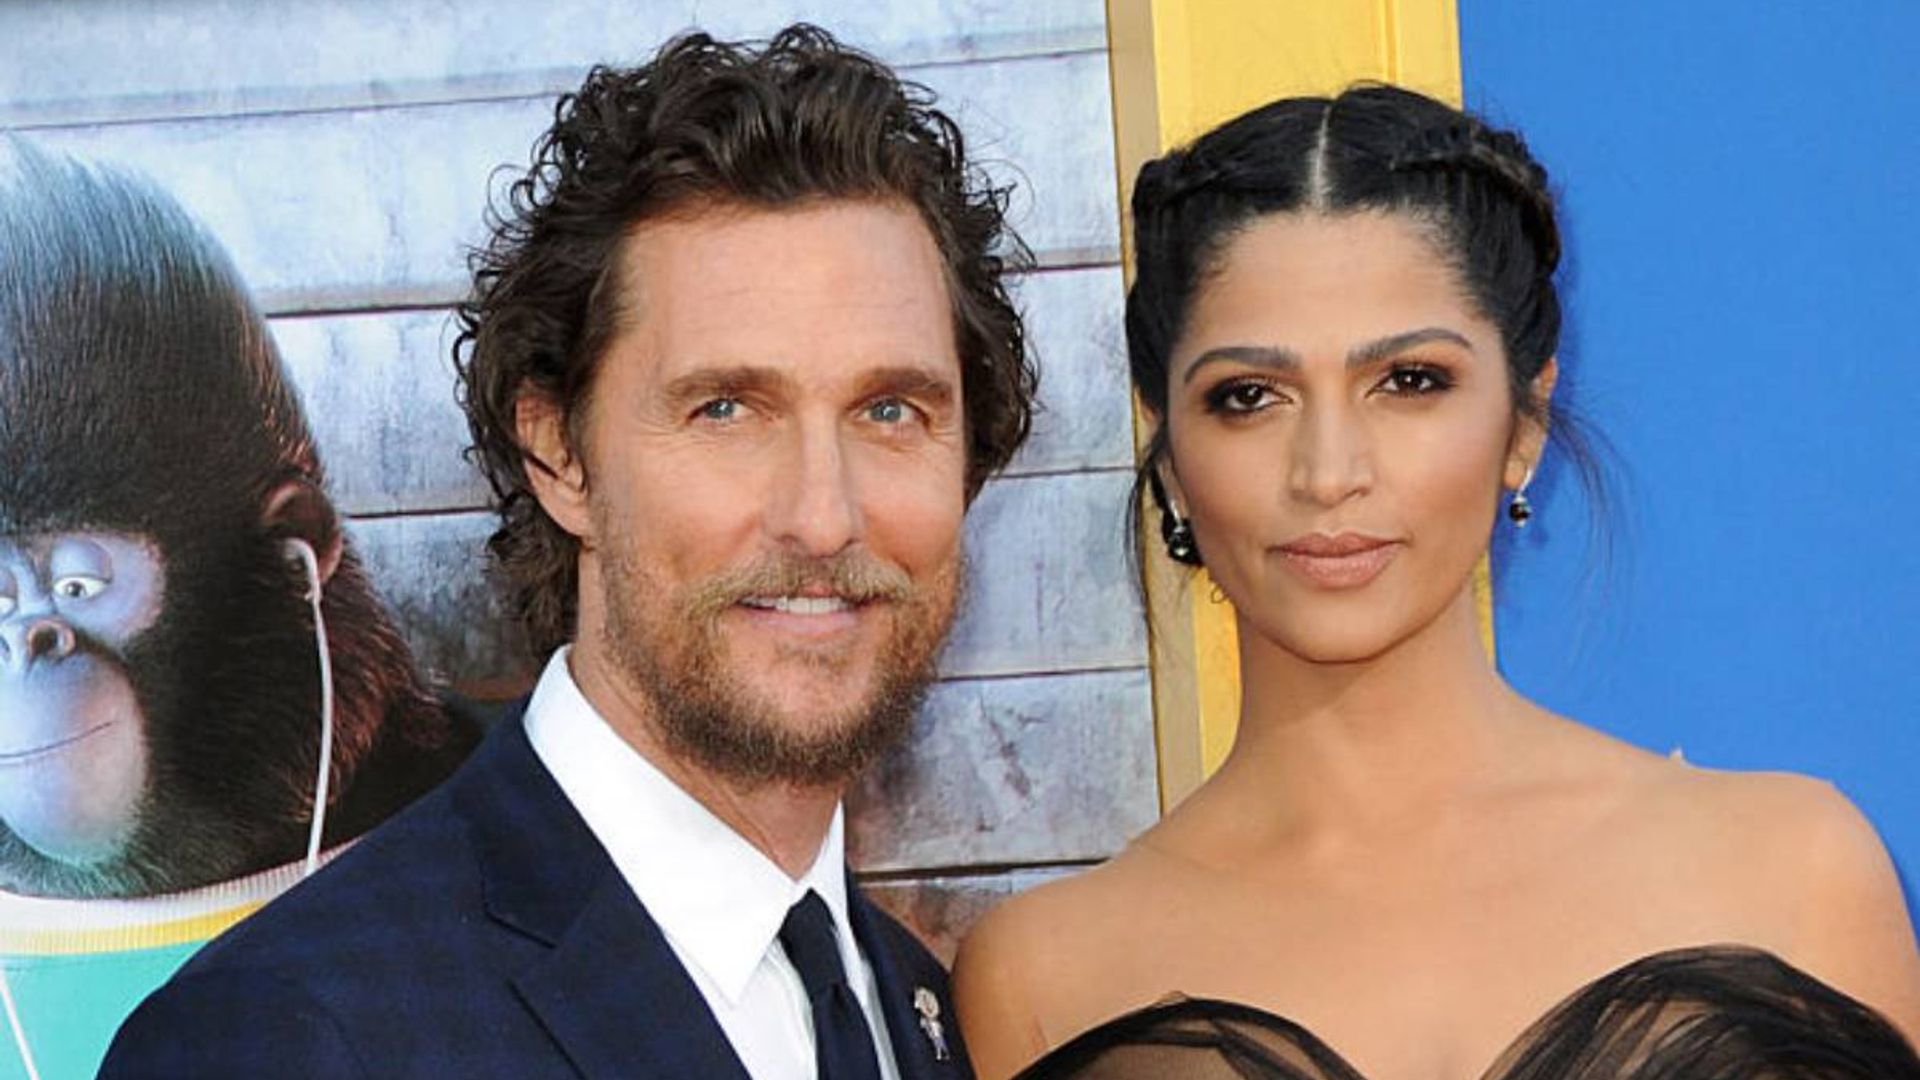 Matthew McConaughey's curly-haired son looks identical to famous dad in rare photo